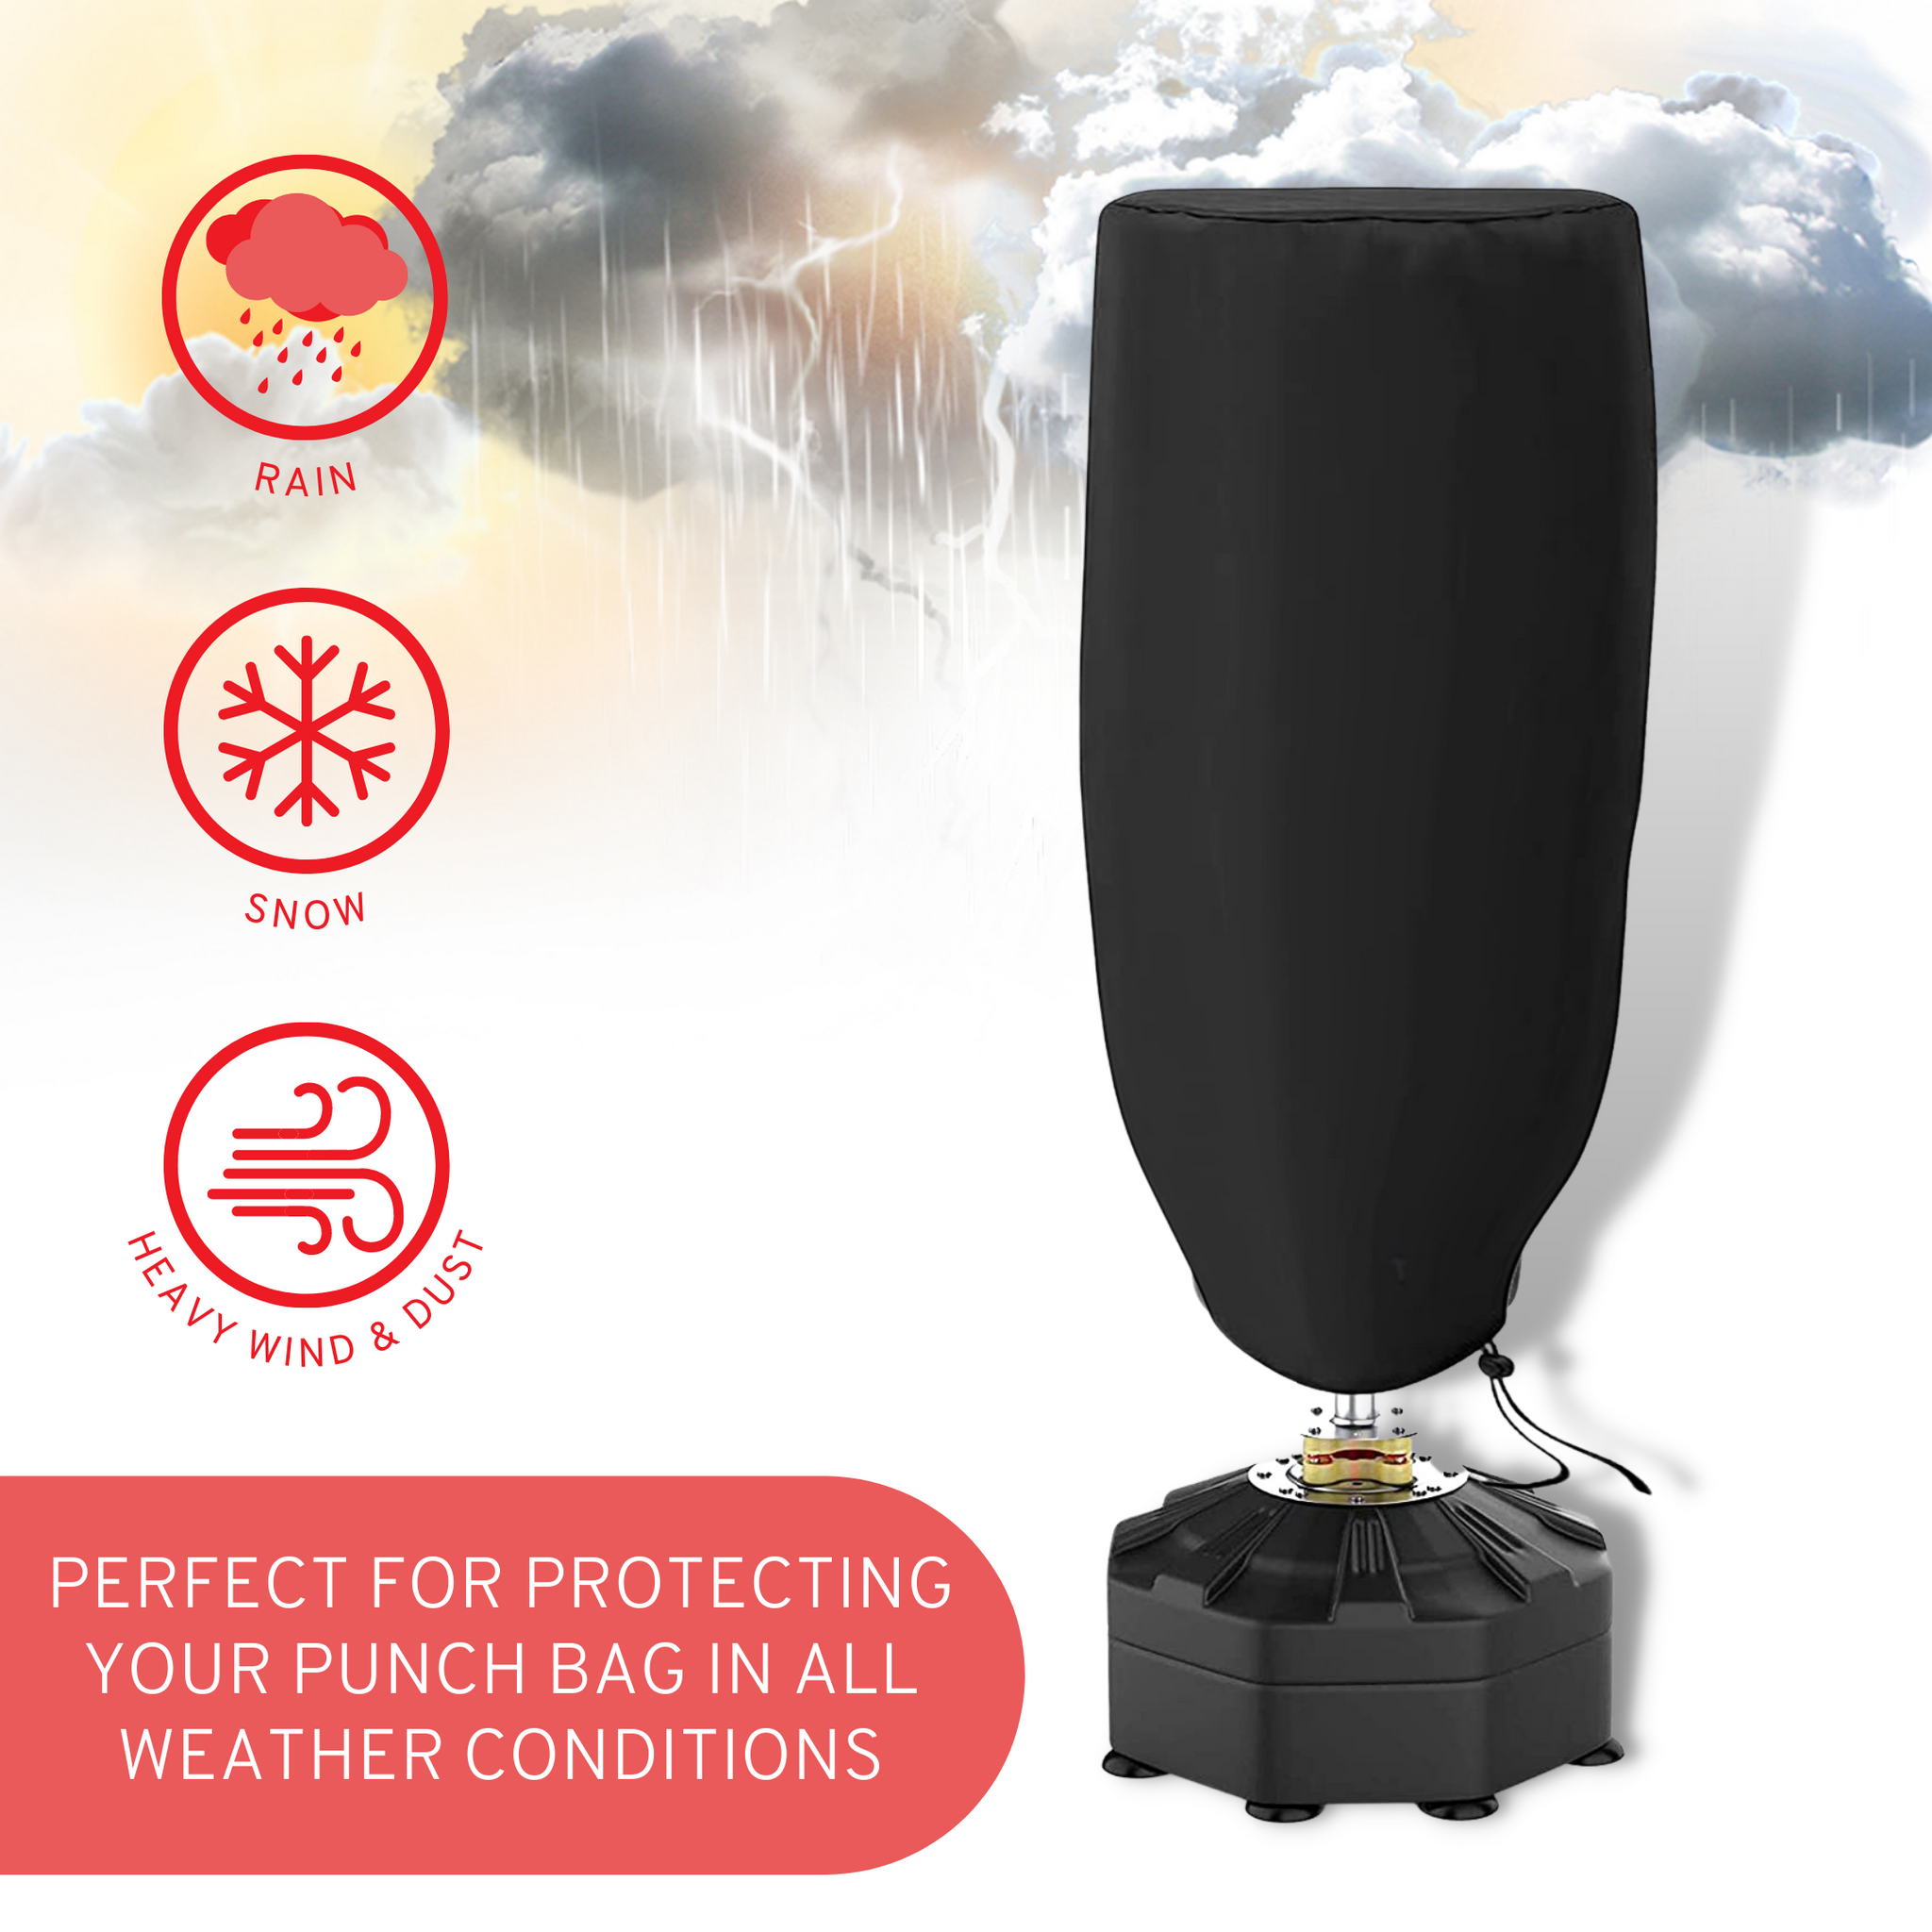 Punch Bag Cover For Outdoors - Weatherproof Rain, Snow, UV Protector For Standing & Hanging Punch Bags